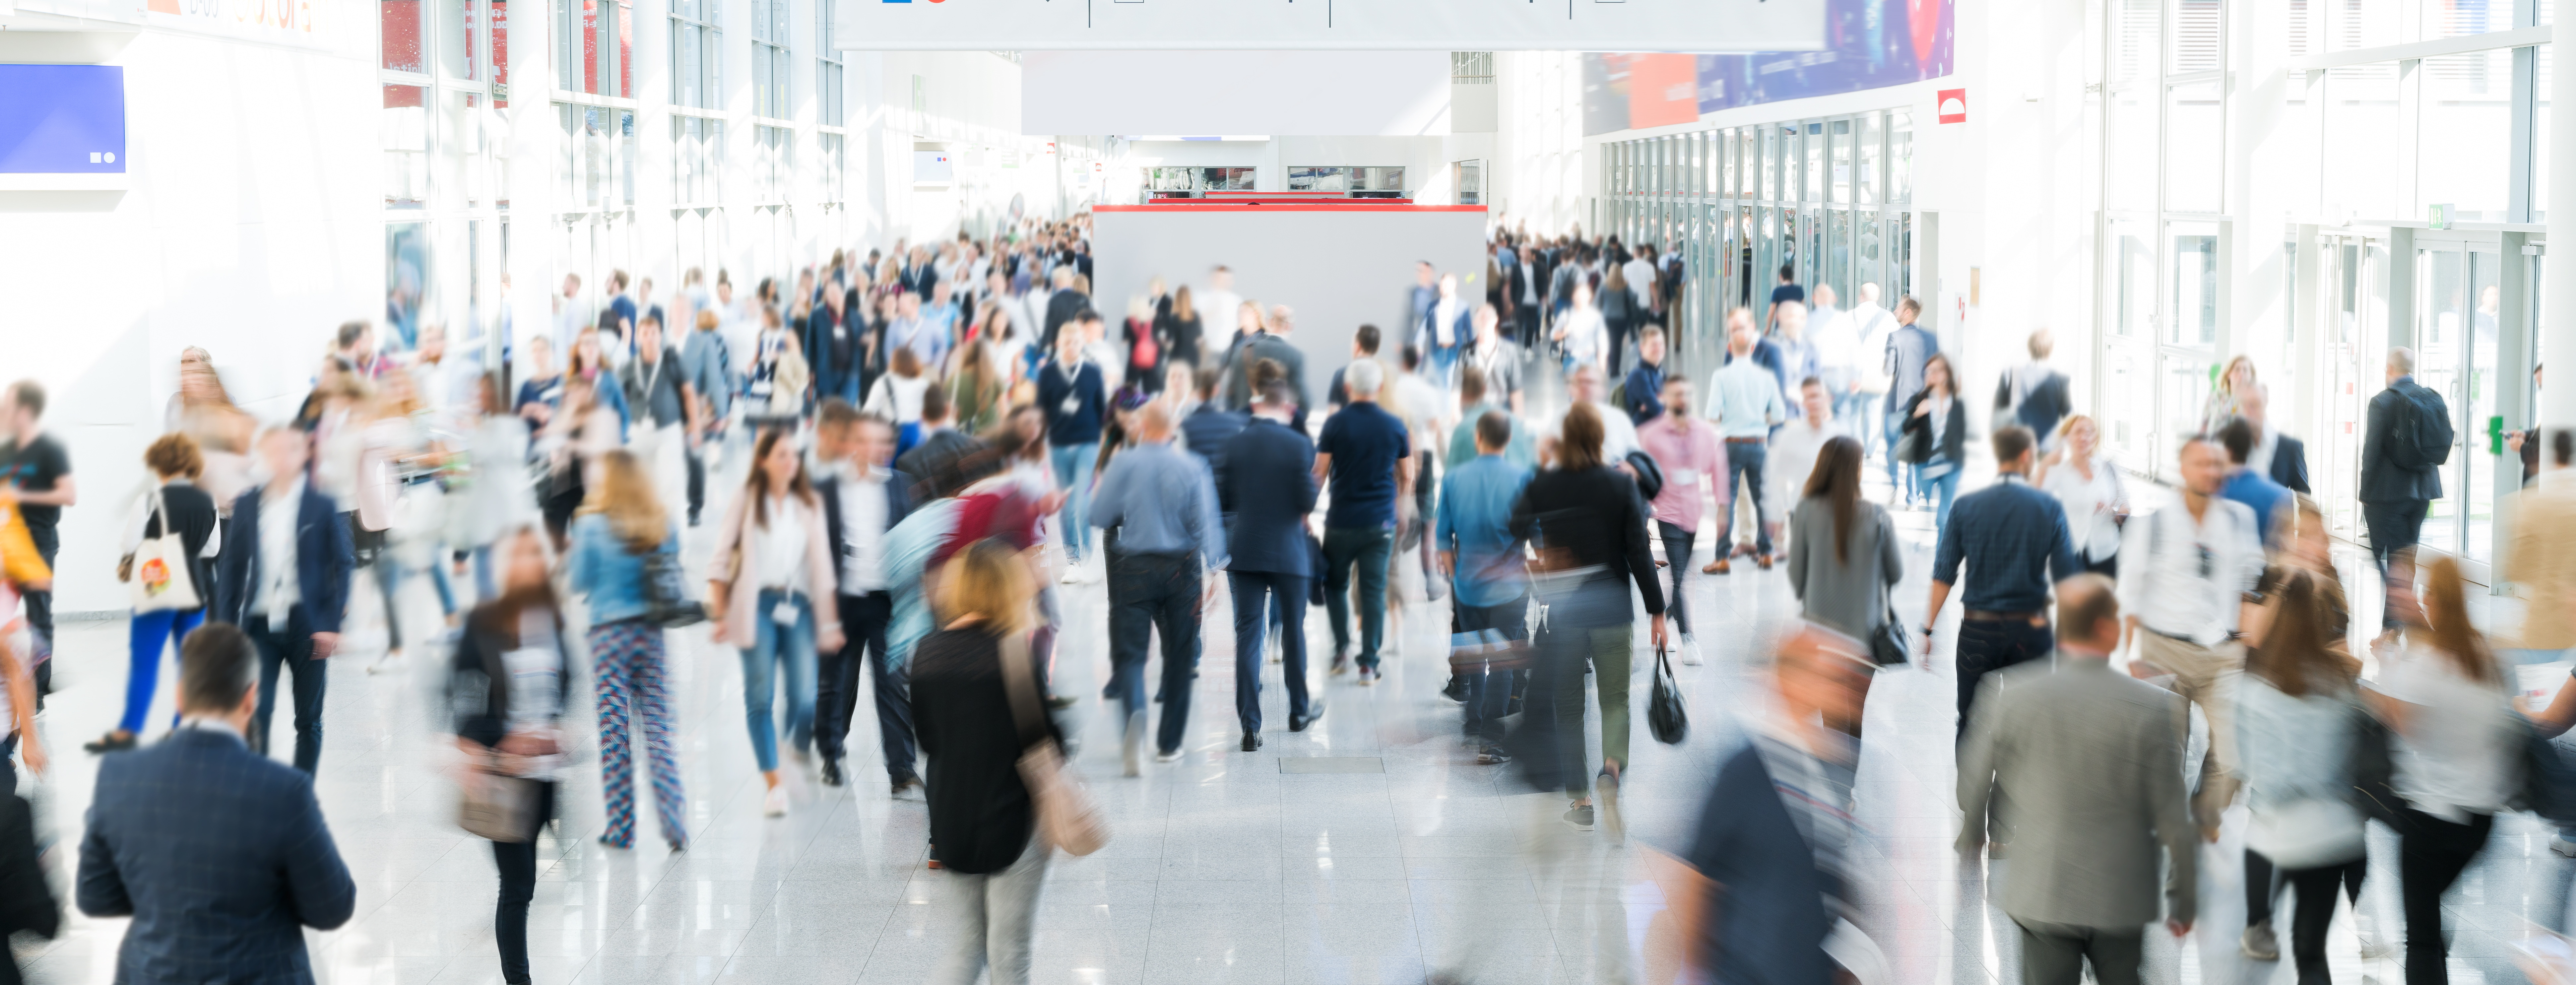 8 Ways WiFi can Help Improve the Trade Show Experience for Exhibitors and Attendees